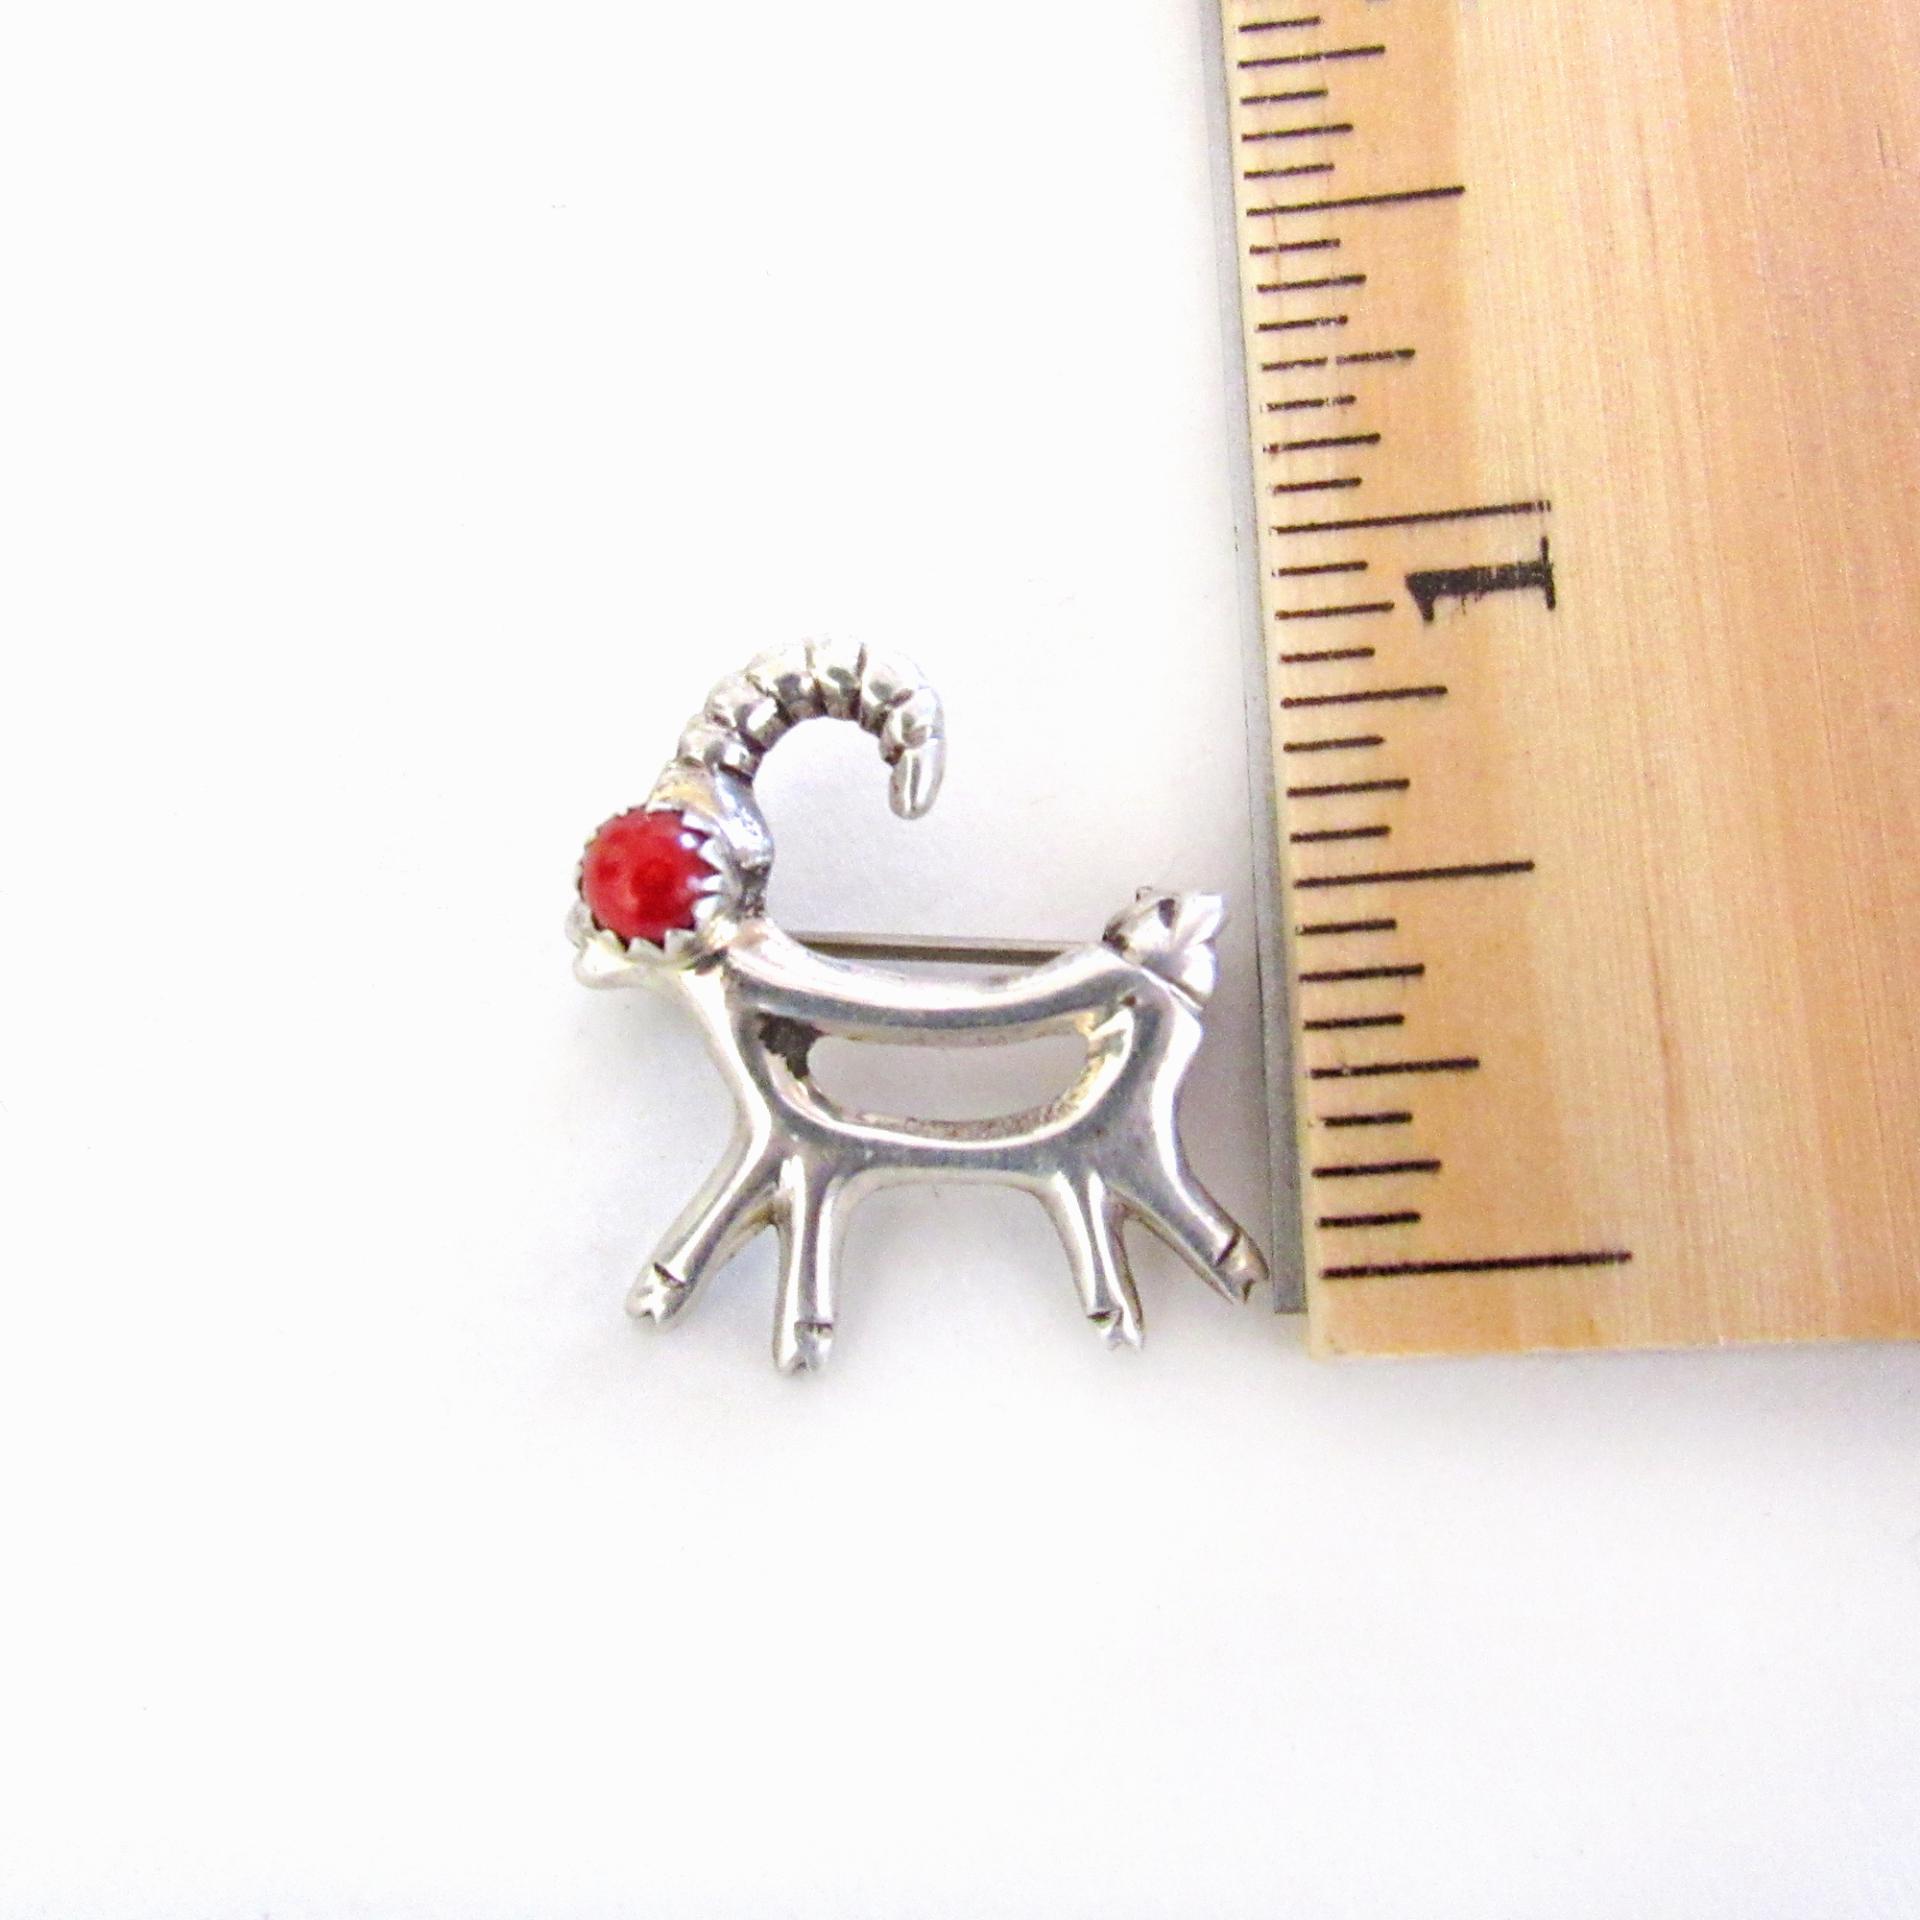 Small Sterling Silver Antelope Reindeer Pin with Red Coral - Christmas Holiday Jewelry Gift for Animal Lovers